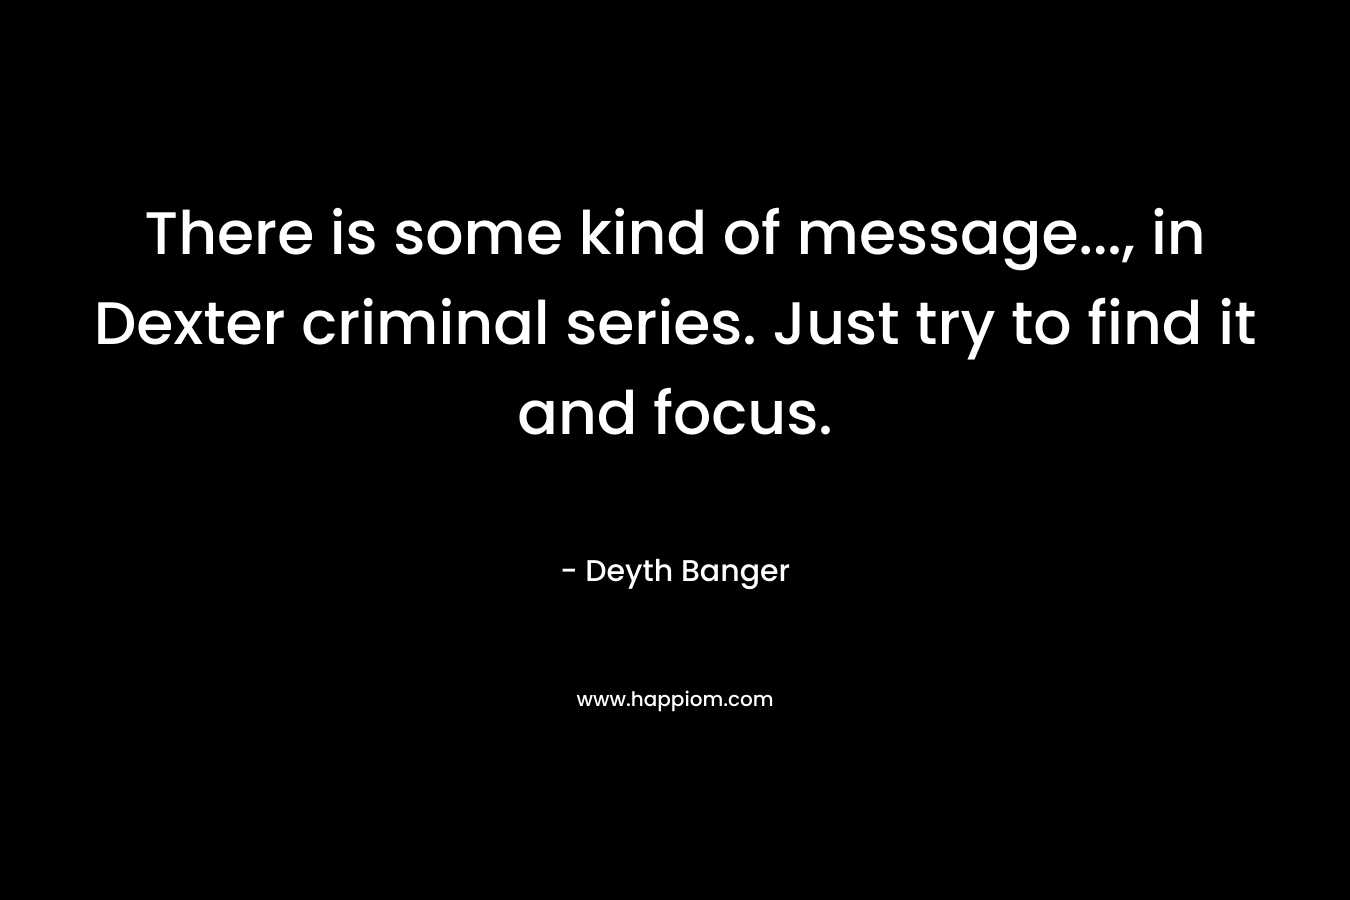 There is some kind of message..., in Dexter criminal series. Just try to find it and focus.